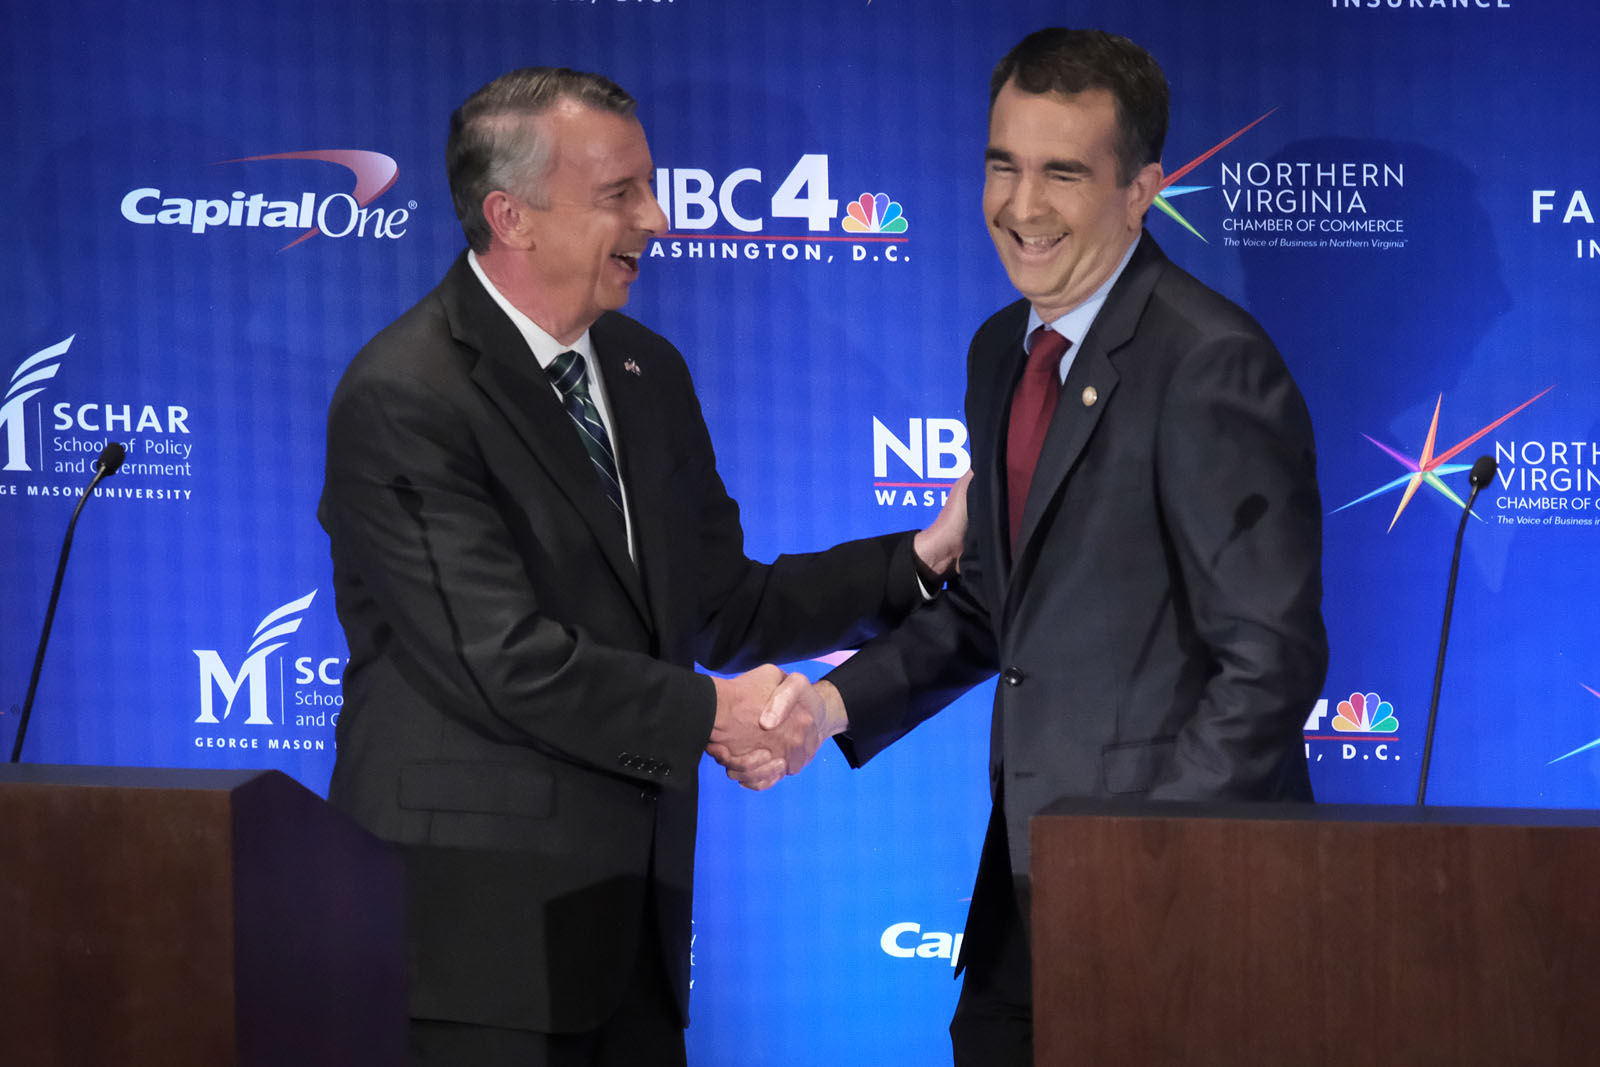 WASHINGTON , DC - SEPTEMBER 19: Gubernatorial candidates Ed Gillespie and Lt. Gov. Ralph Northam shake hands at the end of their debate in Washington, DC on September 19, 2017. (Pool Photo by Bonnie Jo Mount/The Washington Post)